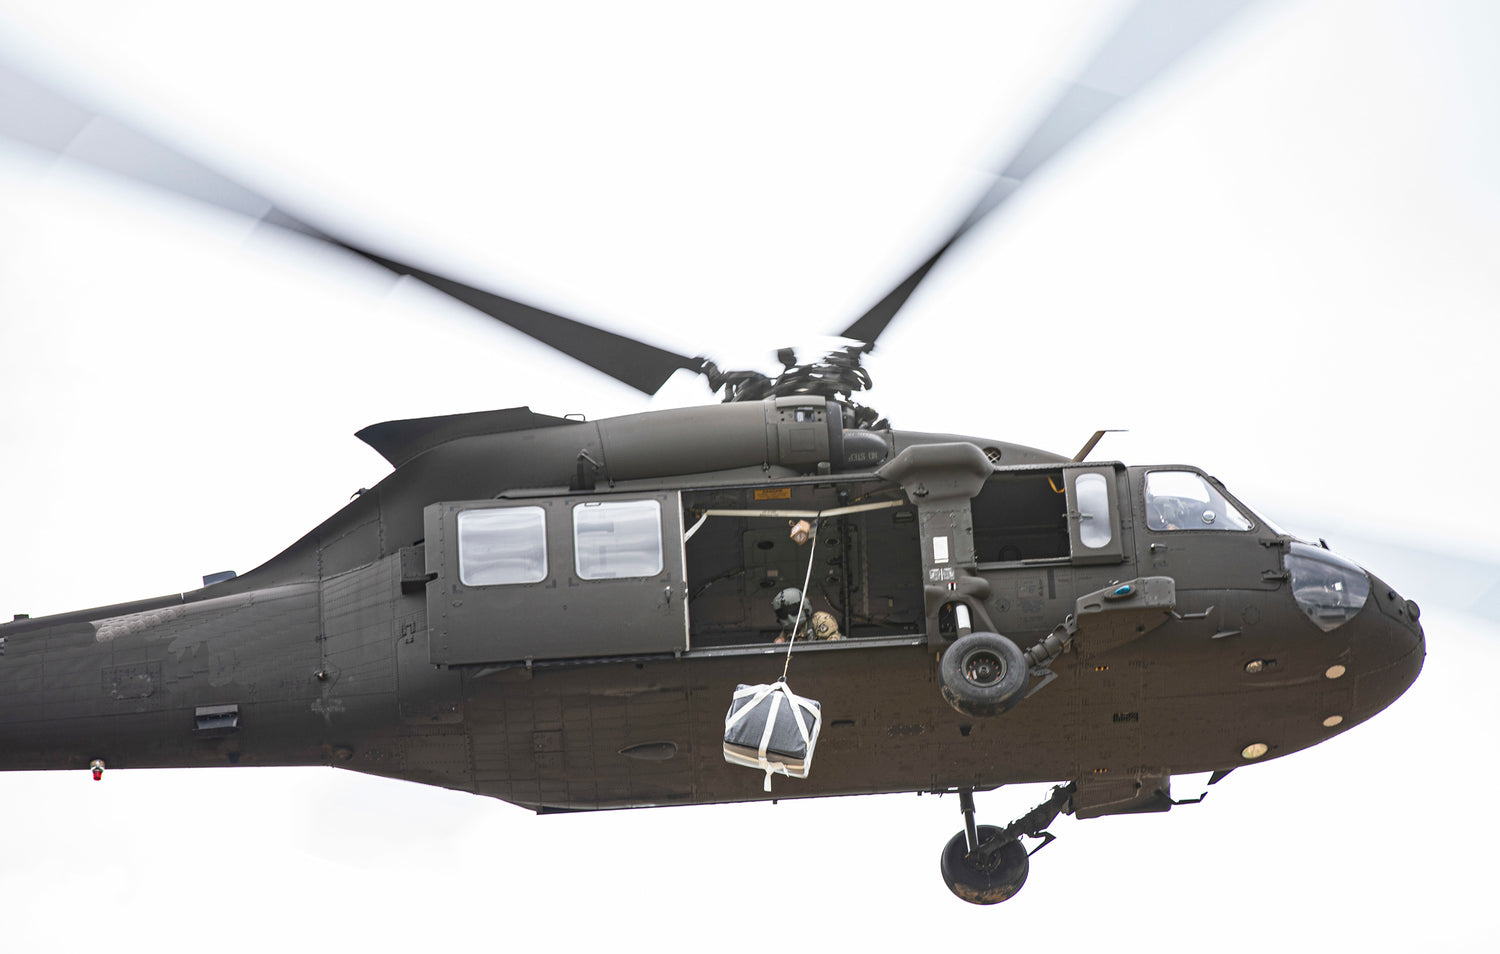 The enhanced speed bag system shows the payload beginning its descent from the Black Hawk Helicopter. Usually they hover around 100' above ground level.